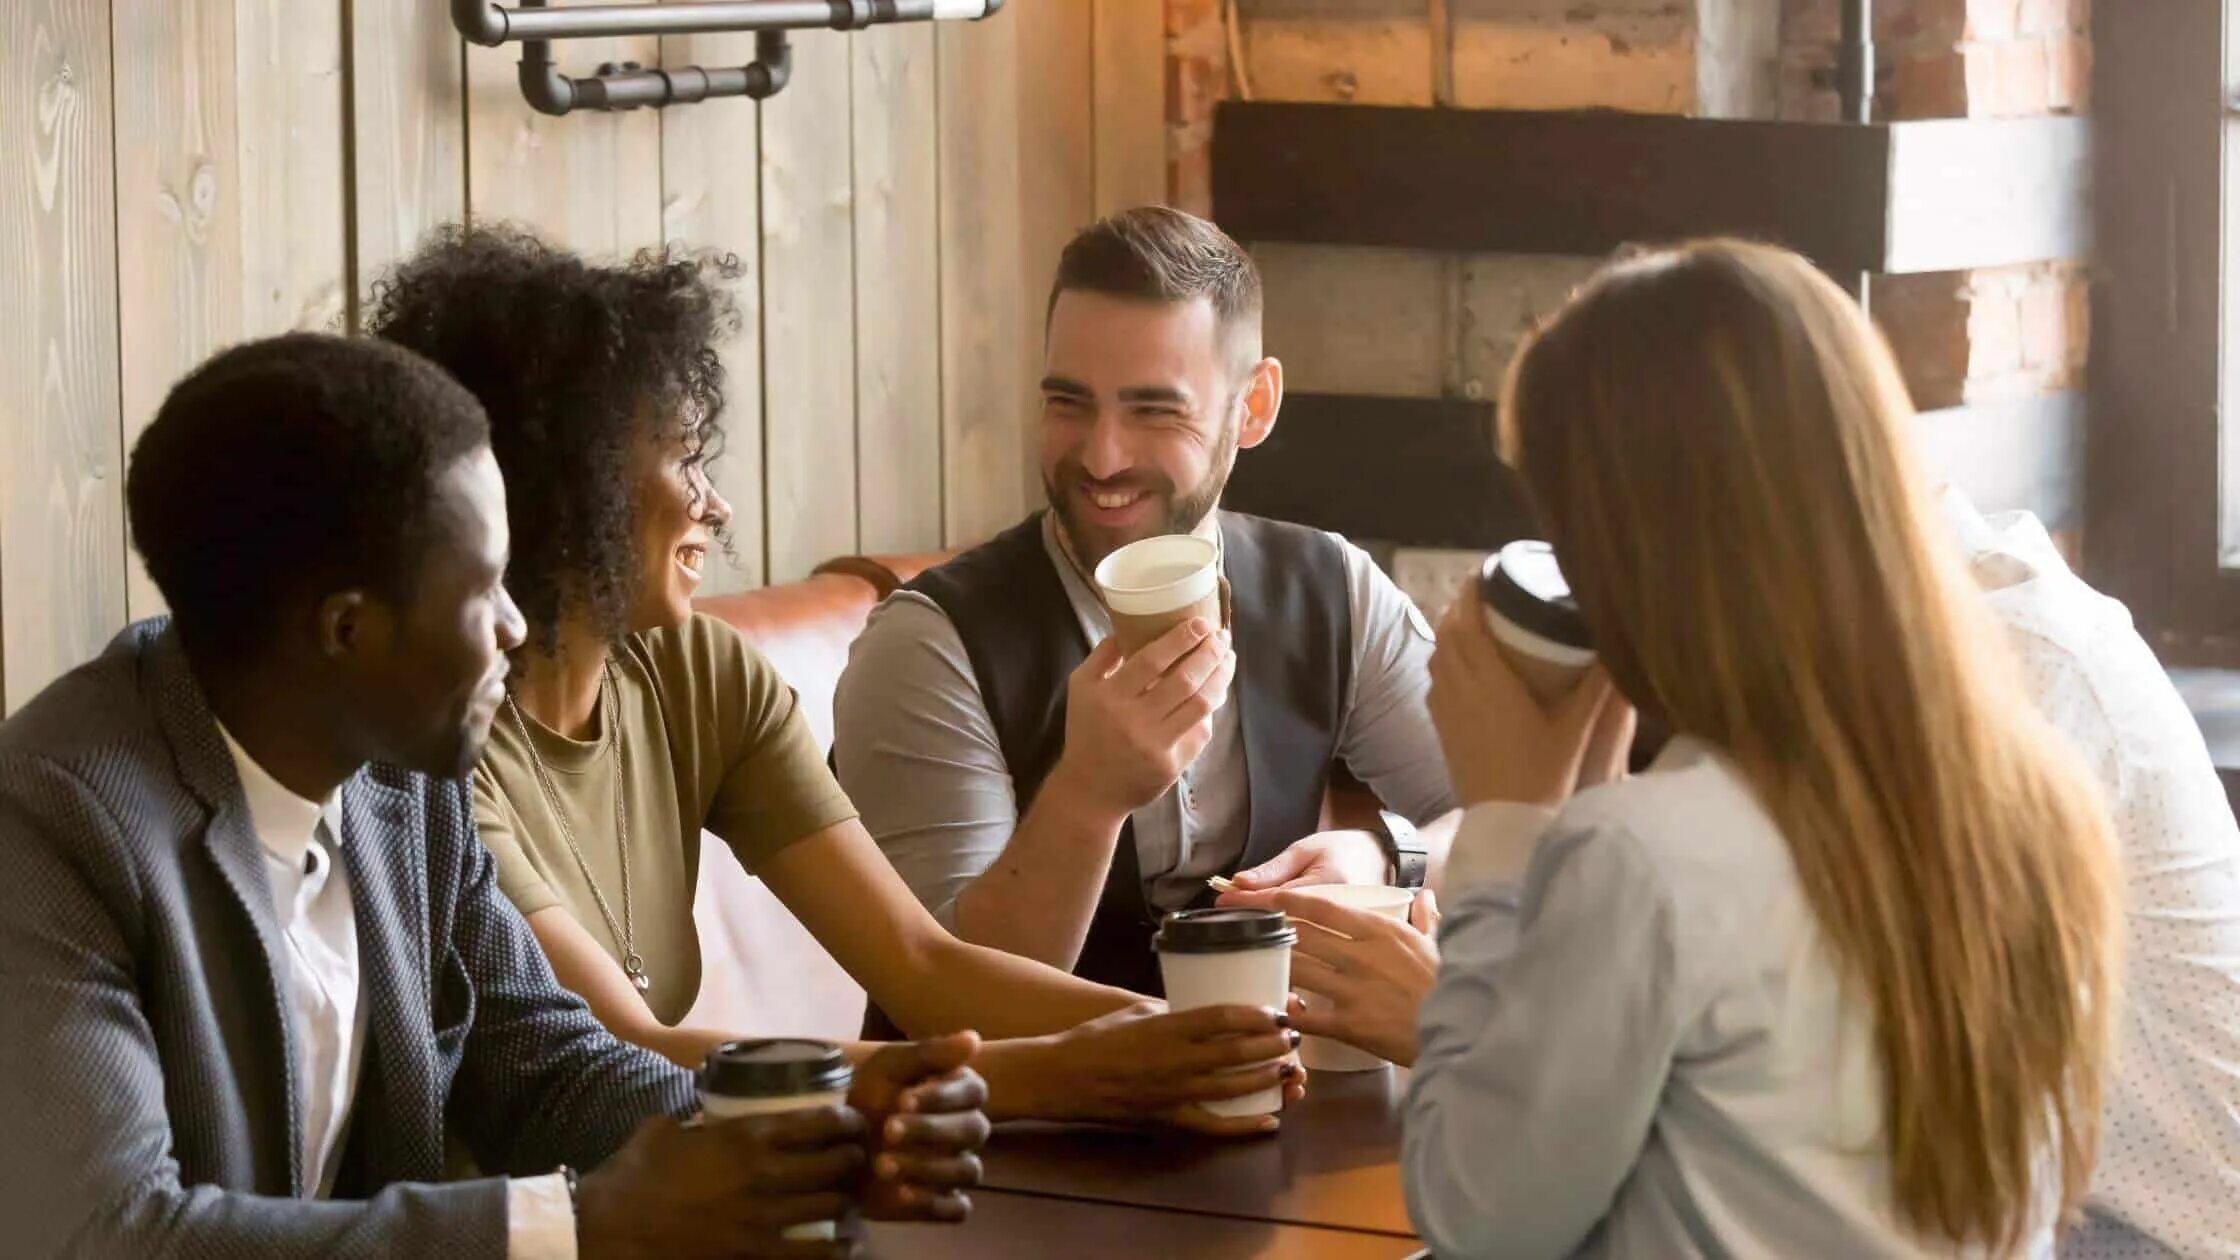 Socialize Aligners. Leave a Tip? In Cafe. Staying.